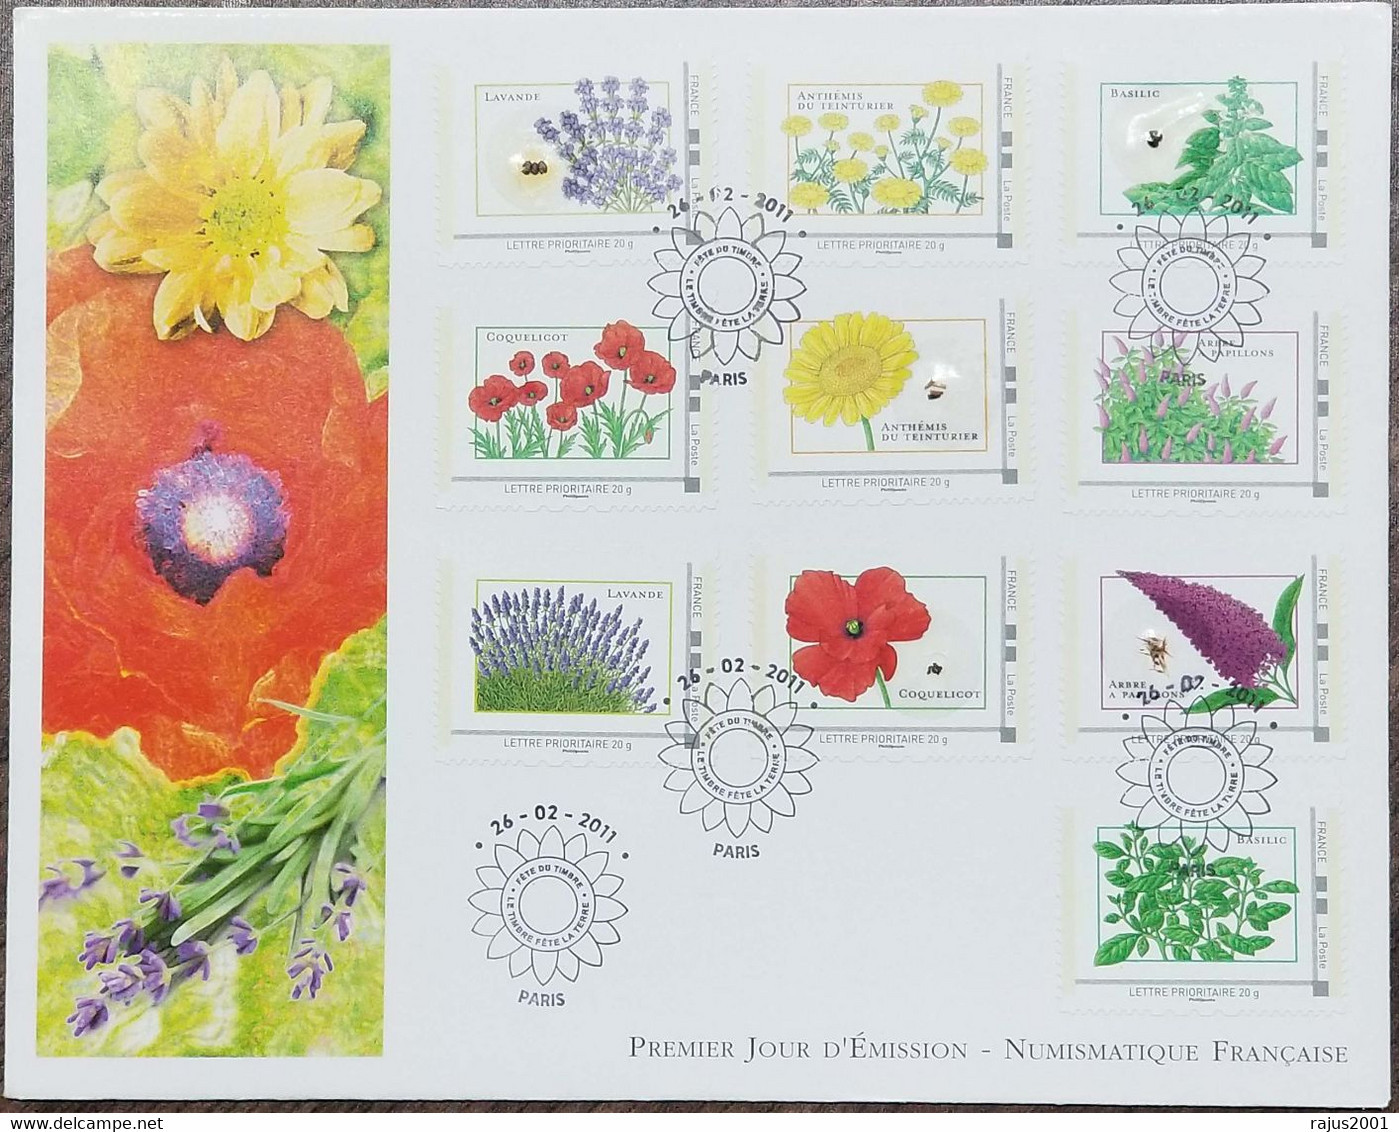 Seeds Of France, Seeds Of Lavander, Anthemis, DIFFERENT REAL FLOWER SEEDS AFFIXED ON Stamp UNUSUAL FDC 2011 - Oddities On Stamps